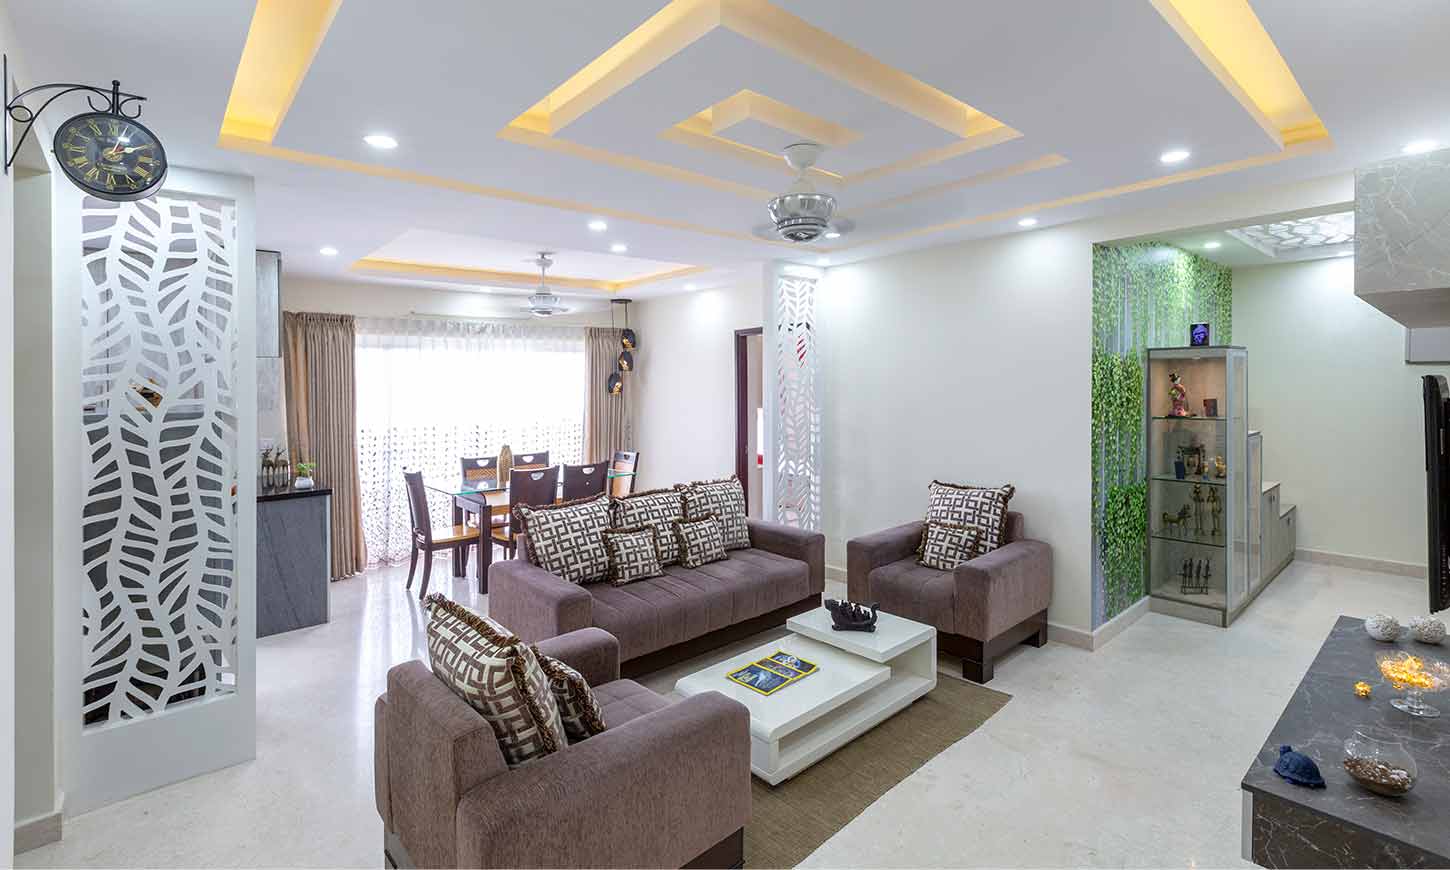 Living room interior with sofa set and dining table designed by home decorators in bangalore